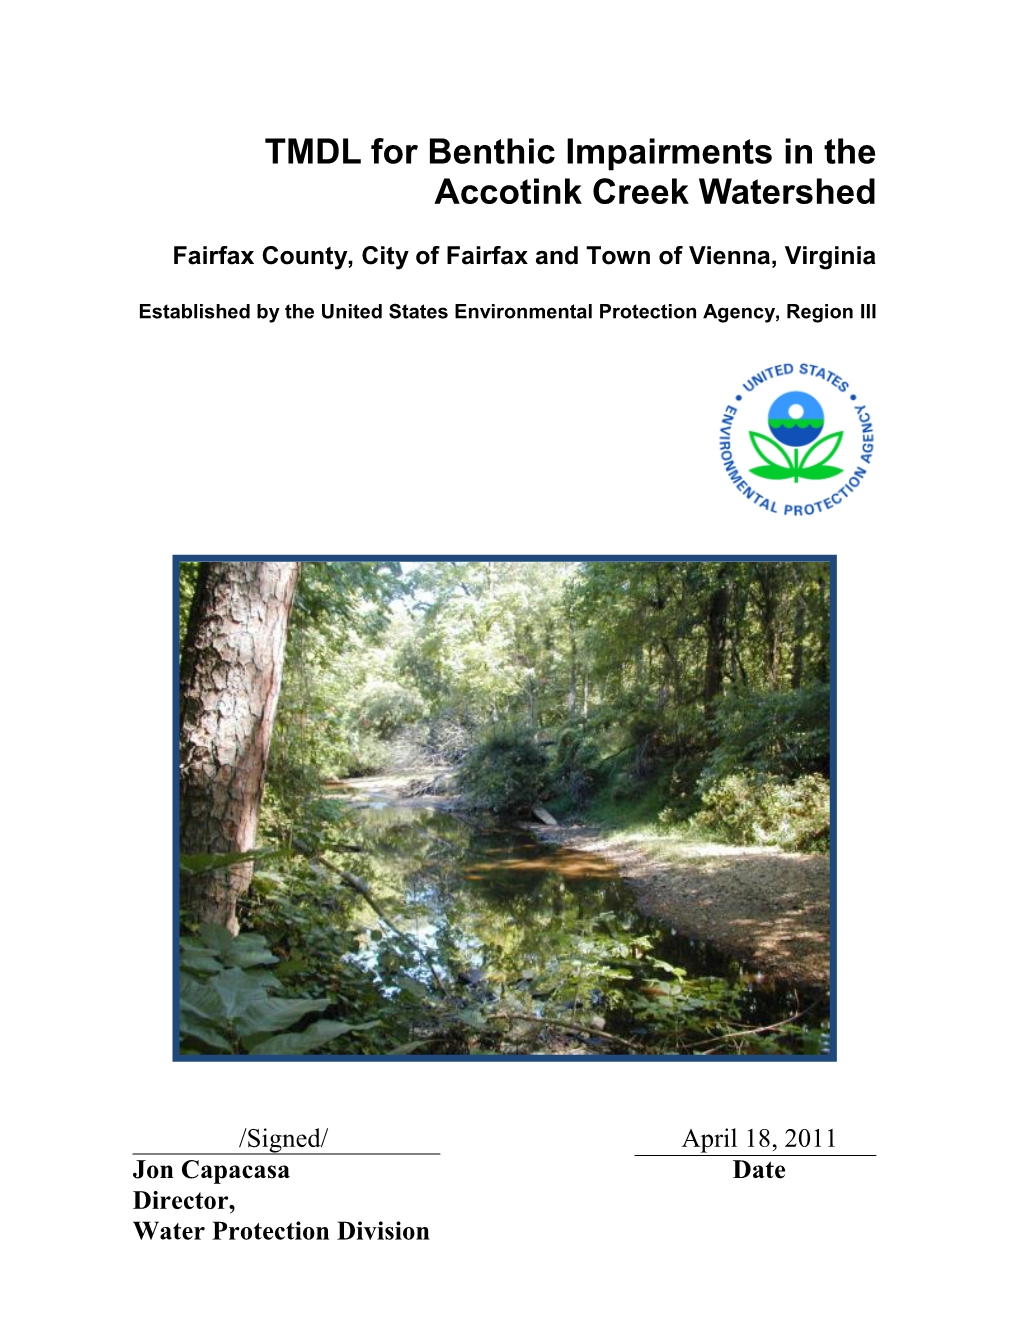 TMDL for Benthic Impairments in the Accotink Creek Watershed